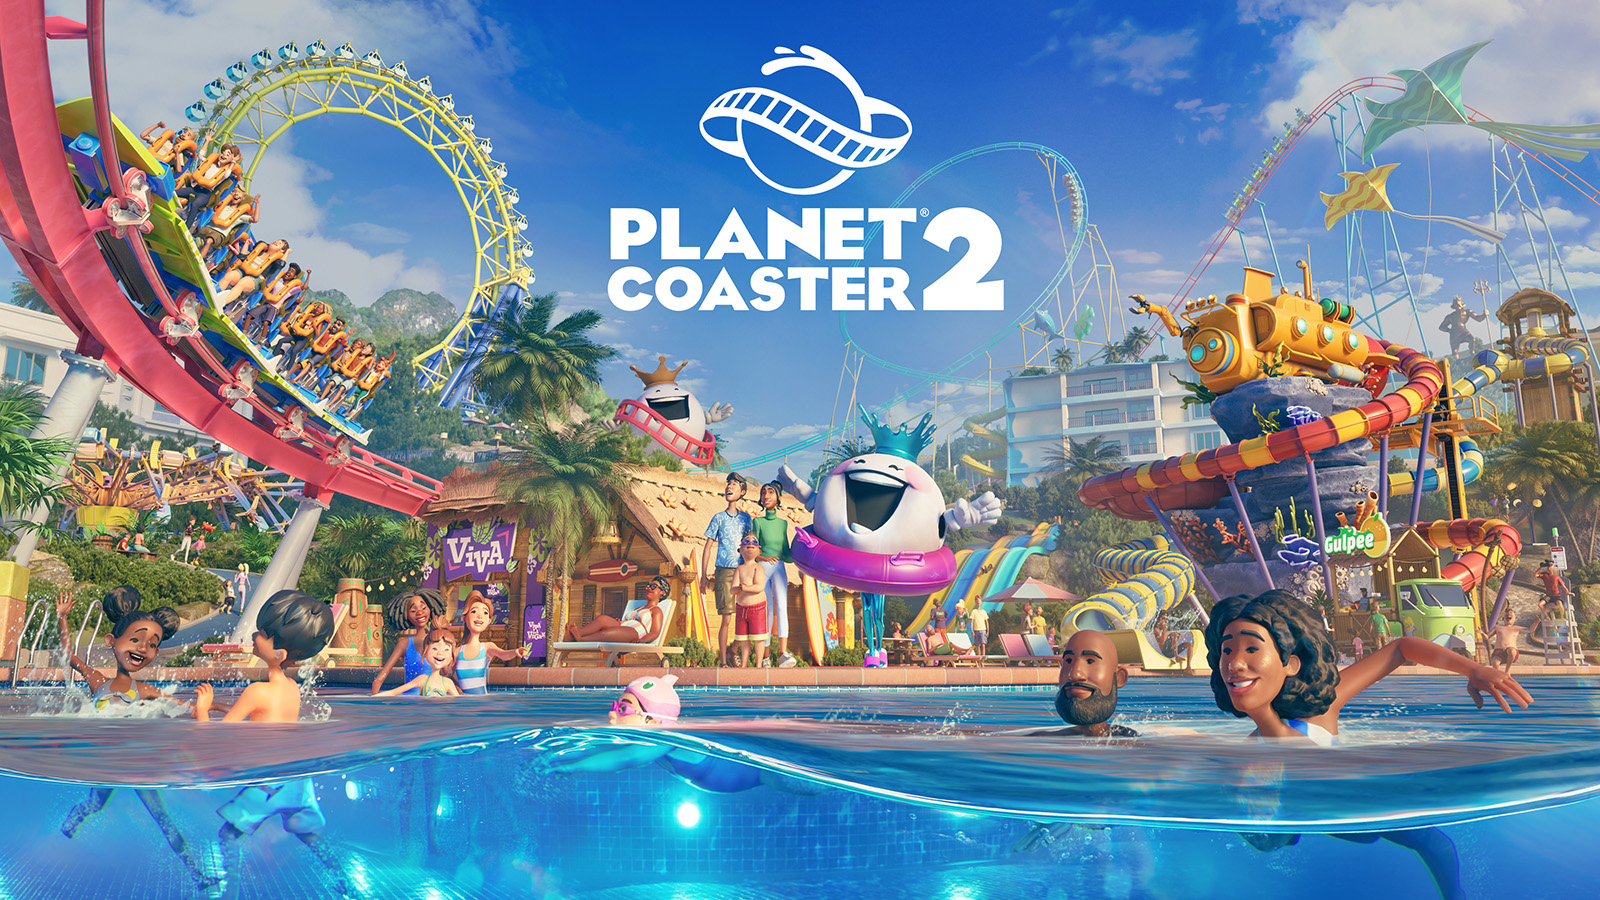 Frontier announces Planet Coaster 2, launching later this year for PC and consoles